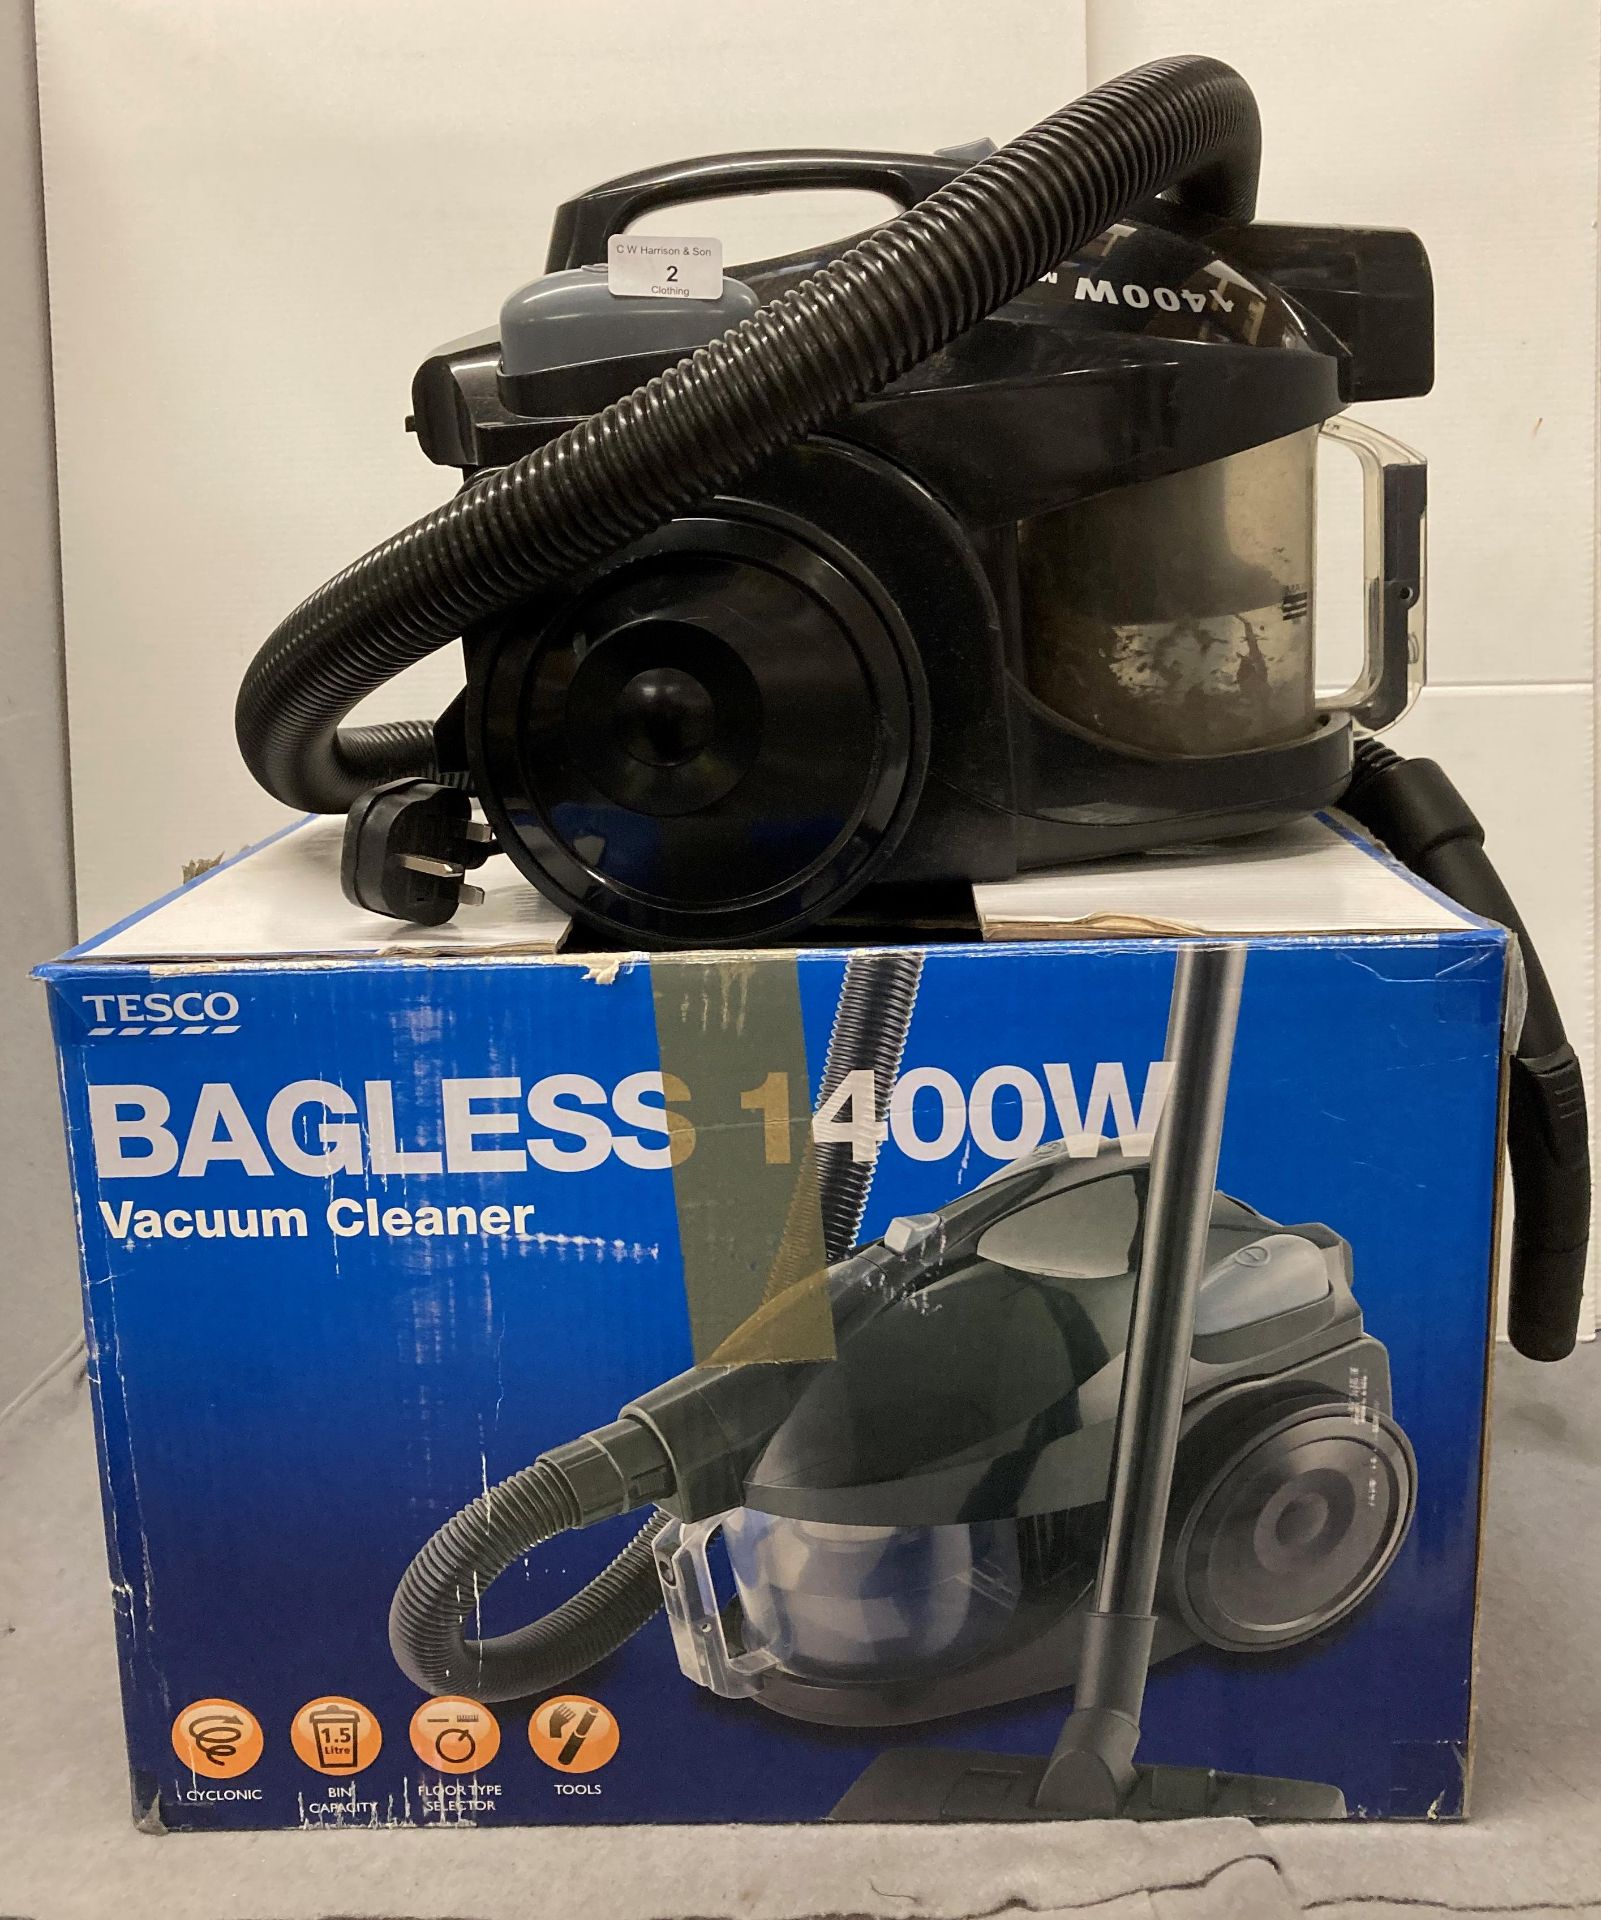 Tesco 400w bagless vacuum cleaner in box *Please note the final purchase price is subject to 20%